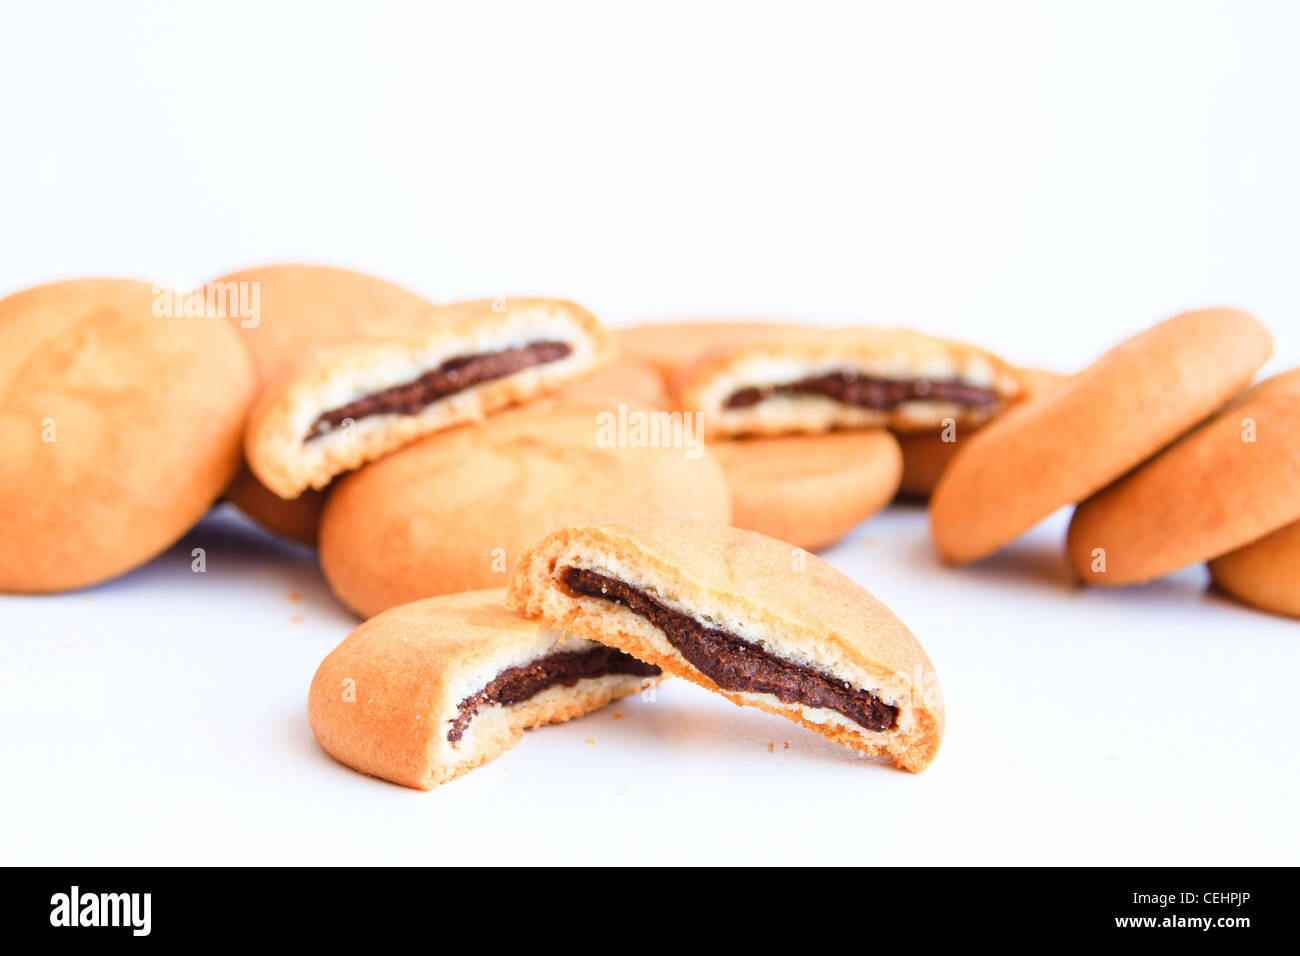 biscuits filled with chocolate isolated on white Stock Photo